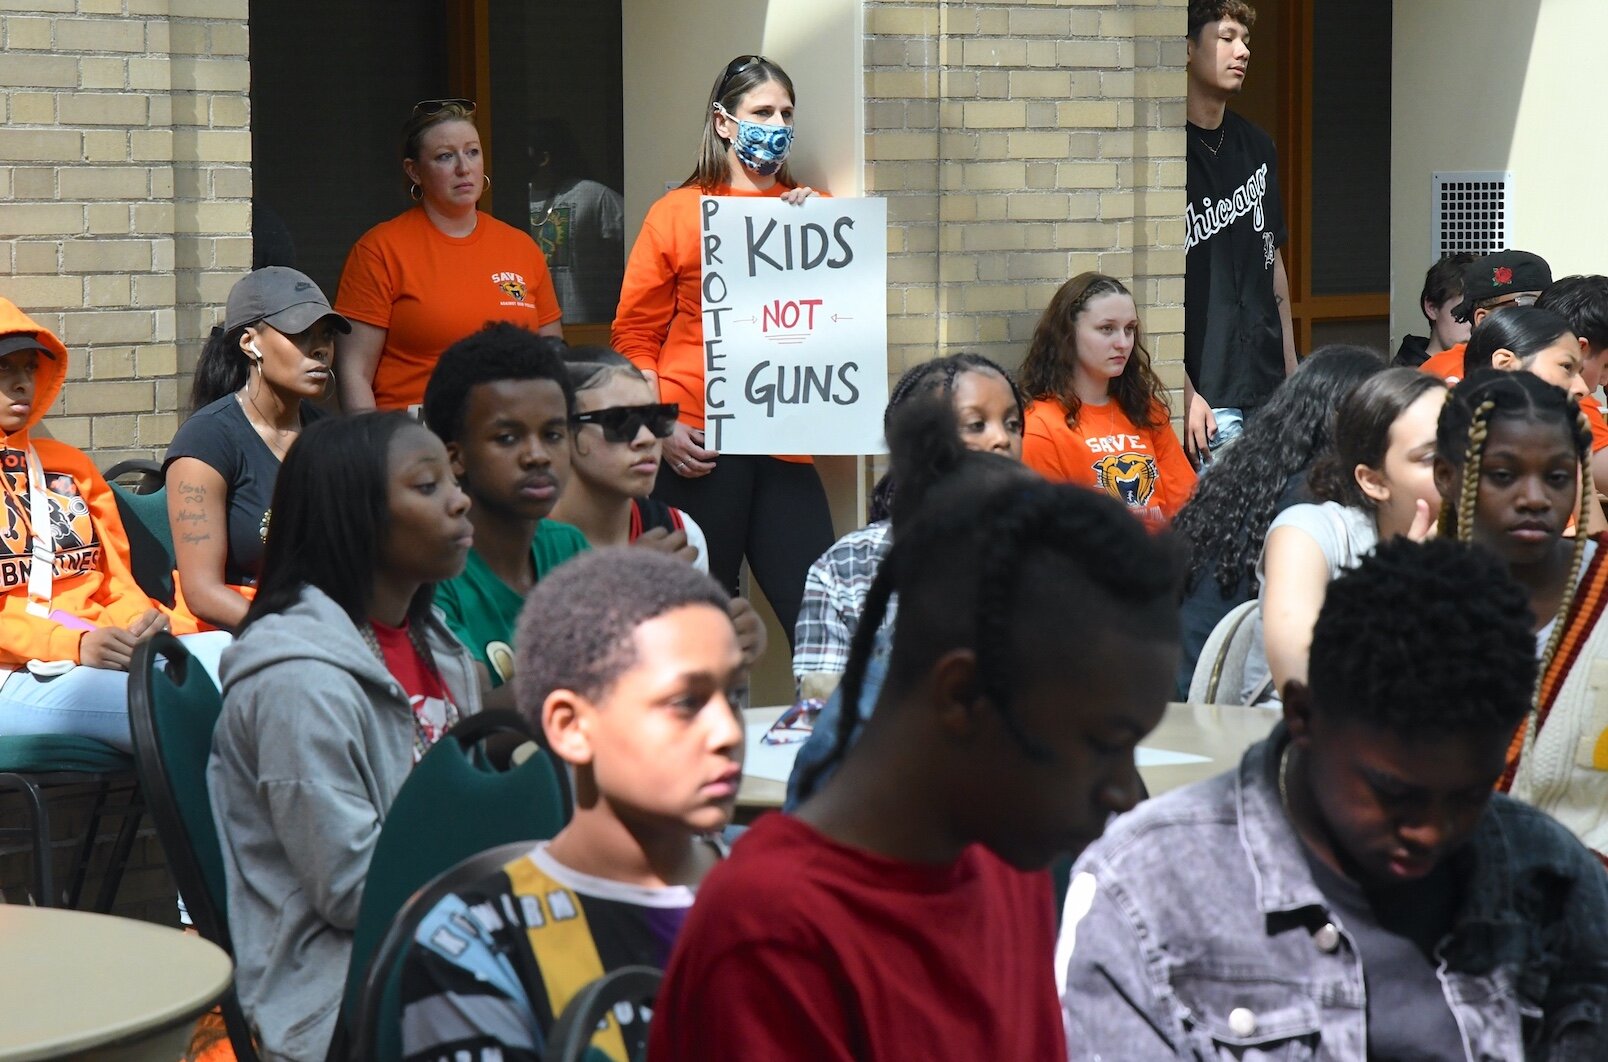 Scenes from the anti-gun rally at First Congregational Church in downtown Battle Creek.